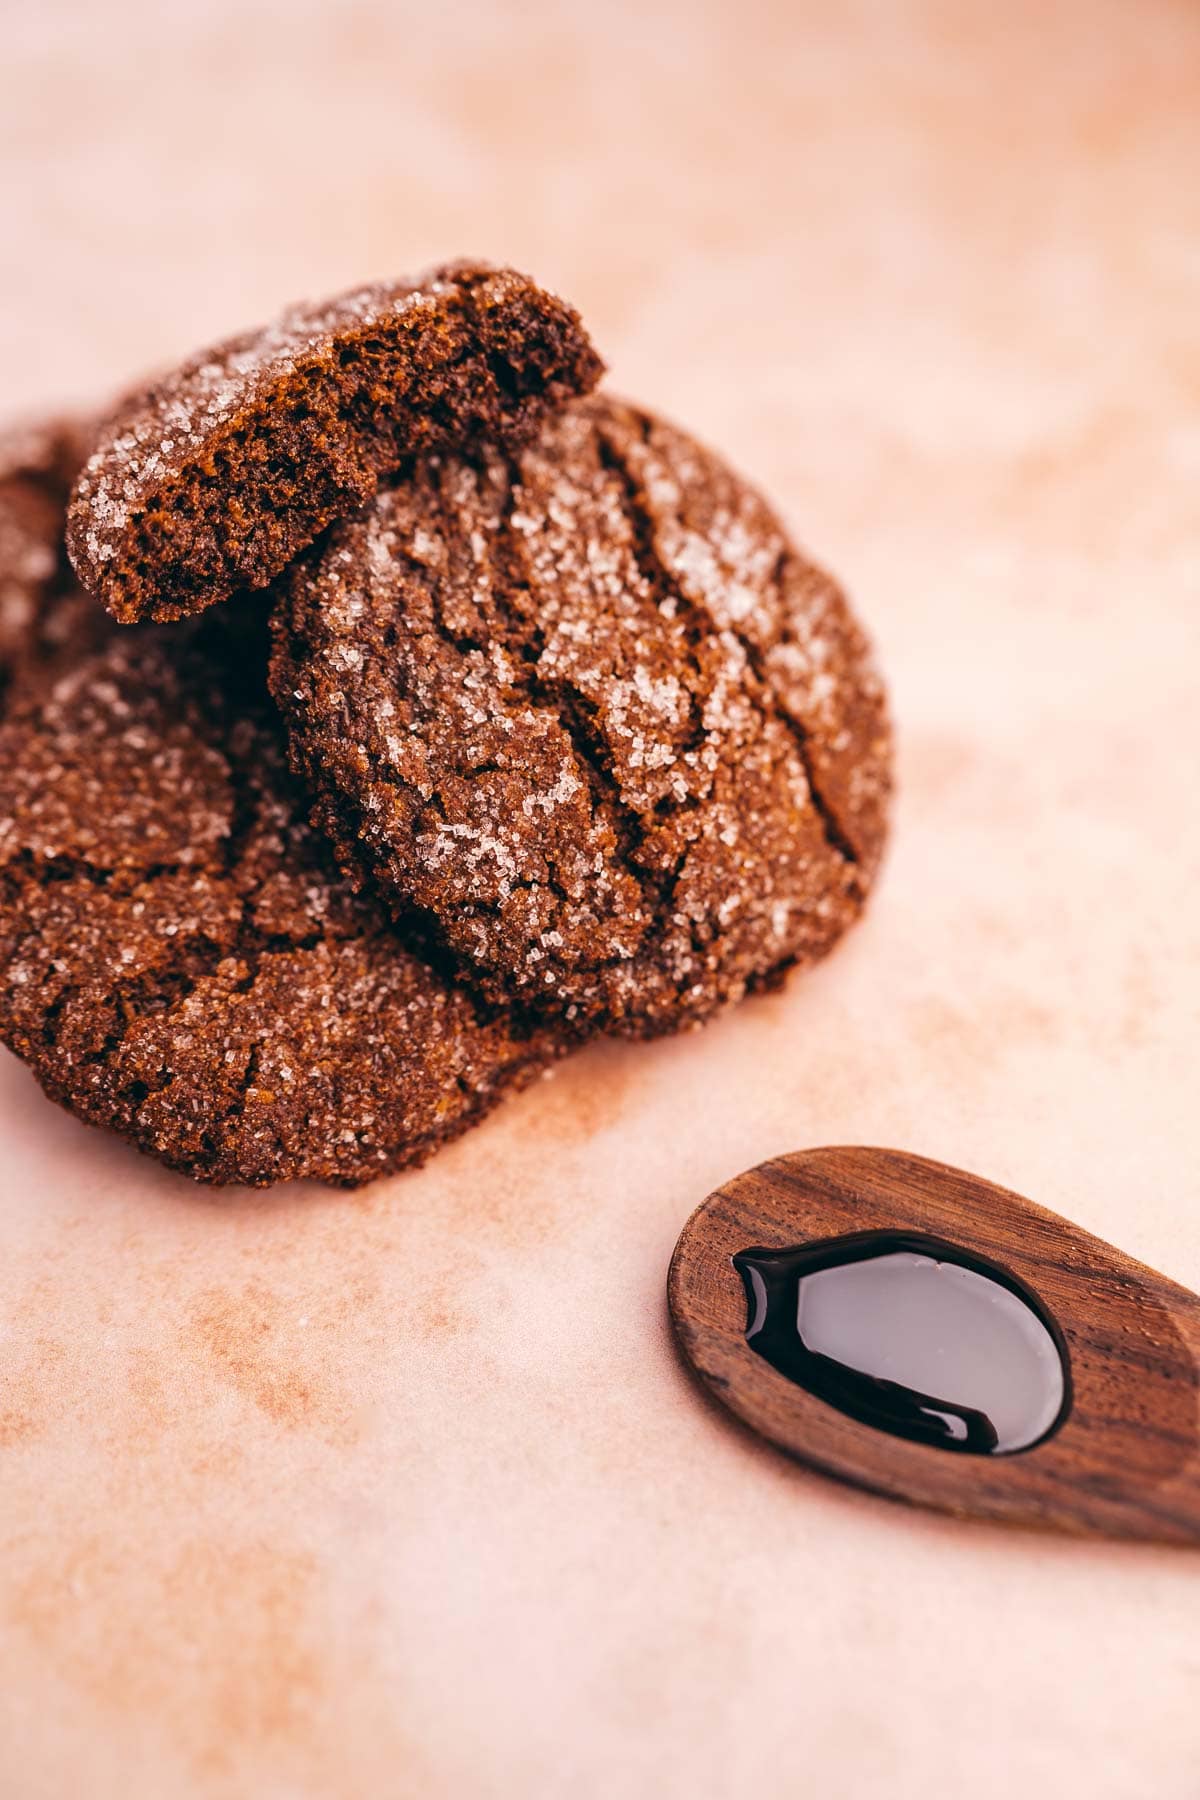 A pile of gluten free molasses cookies and a wooden spoon on a table.